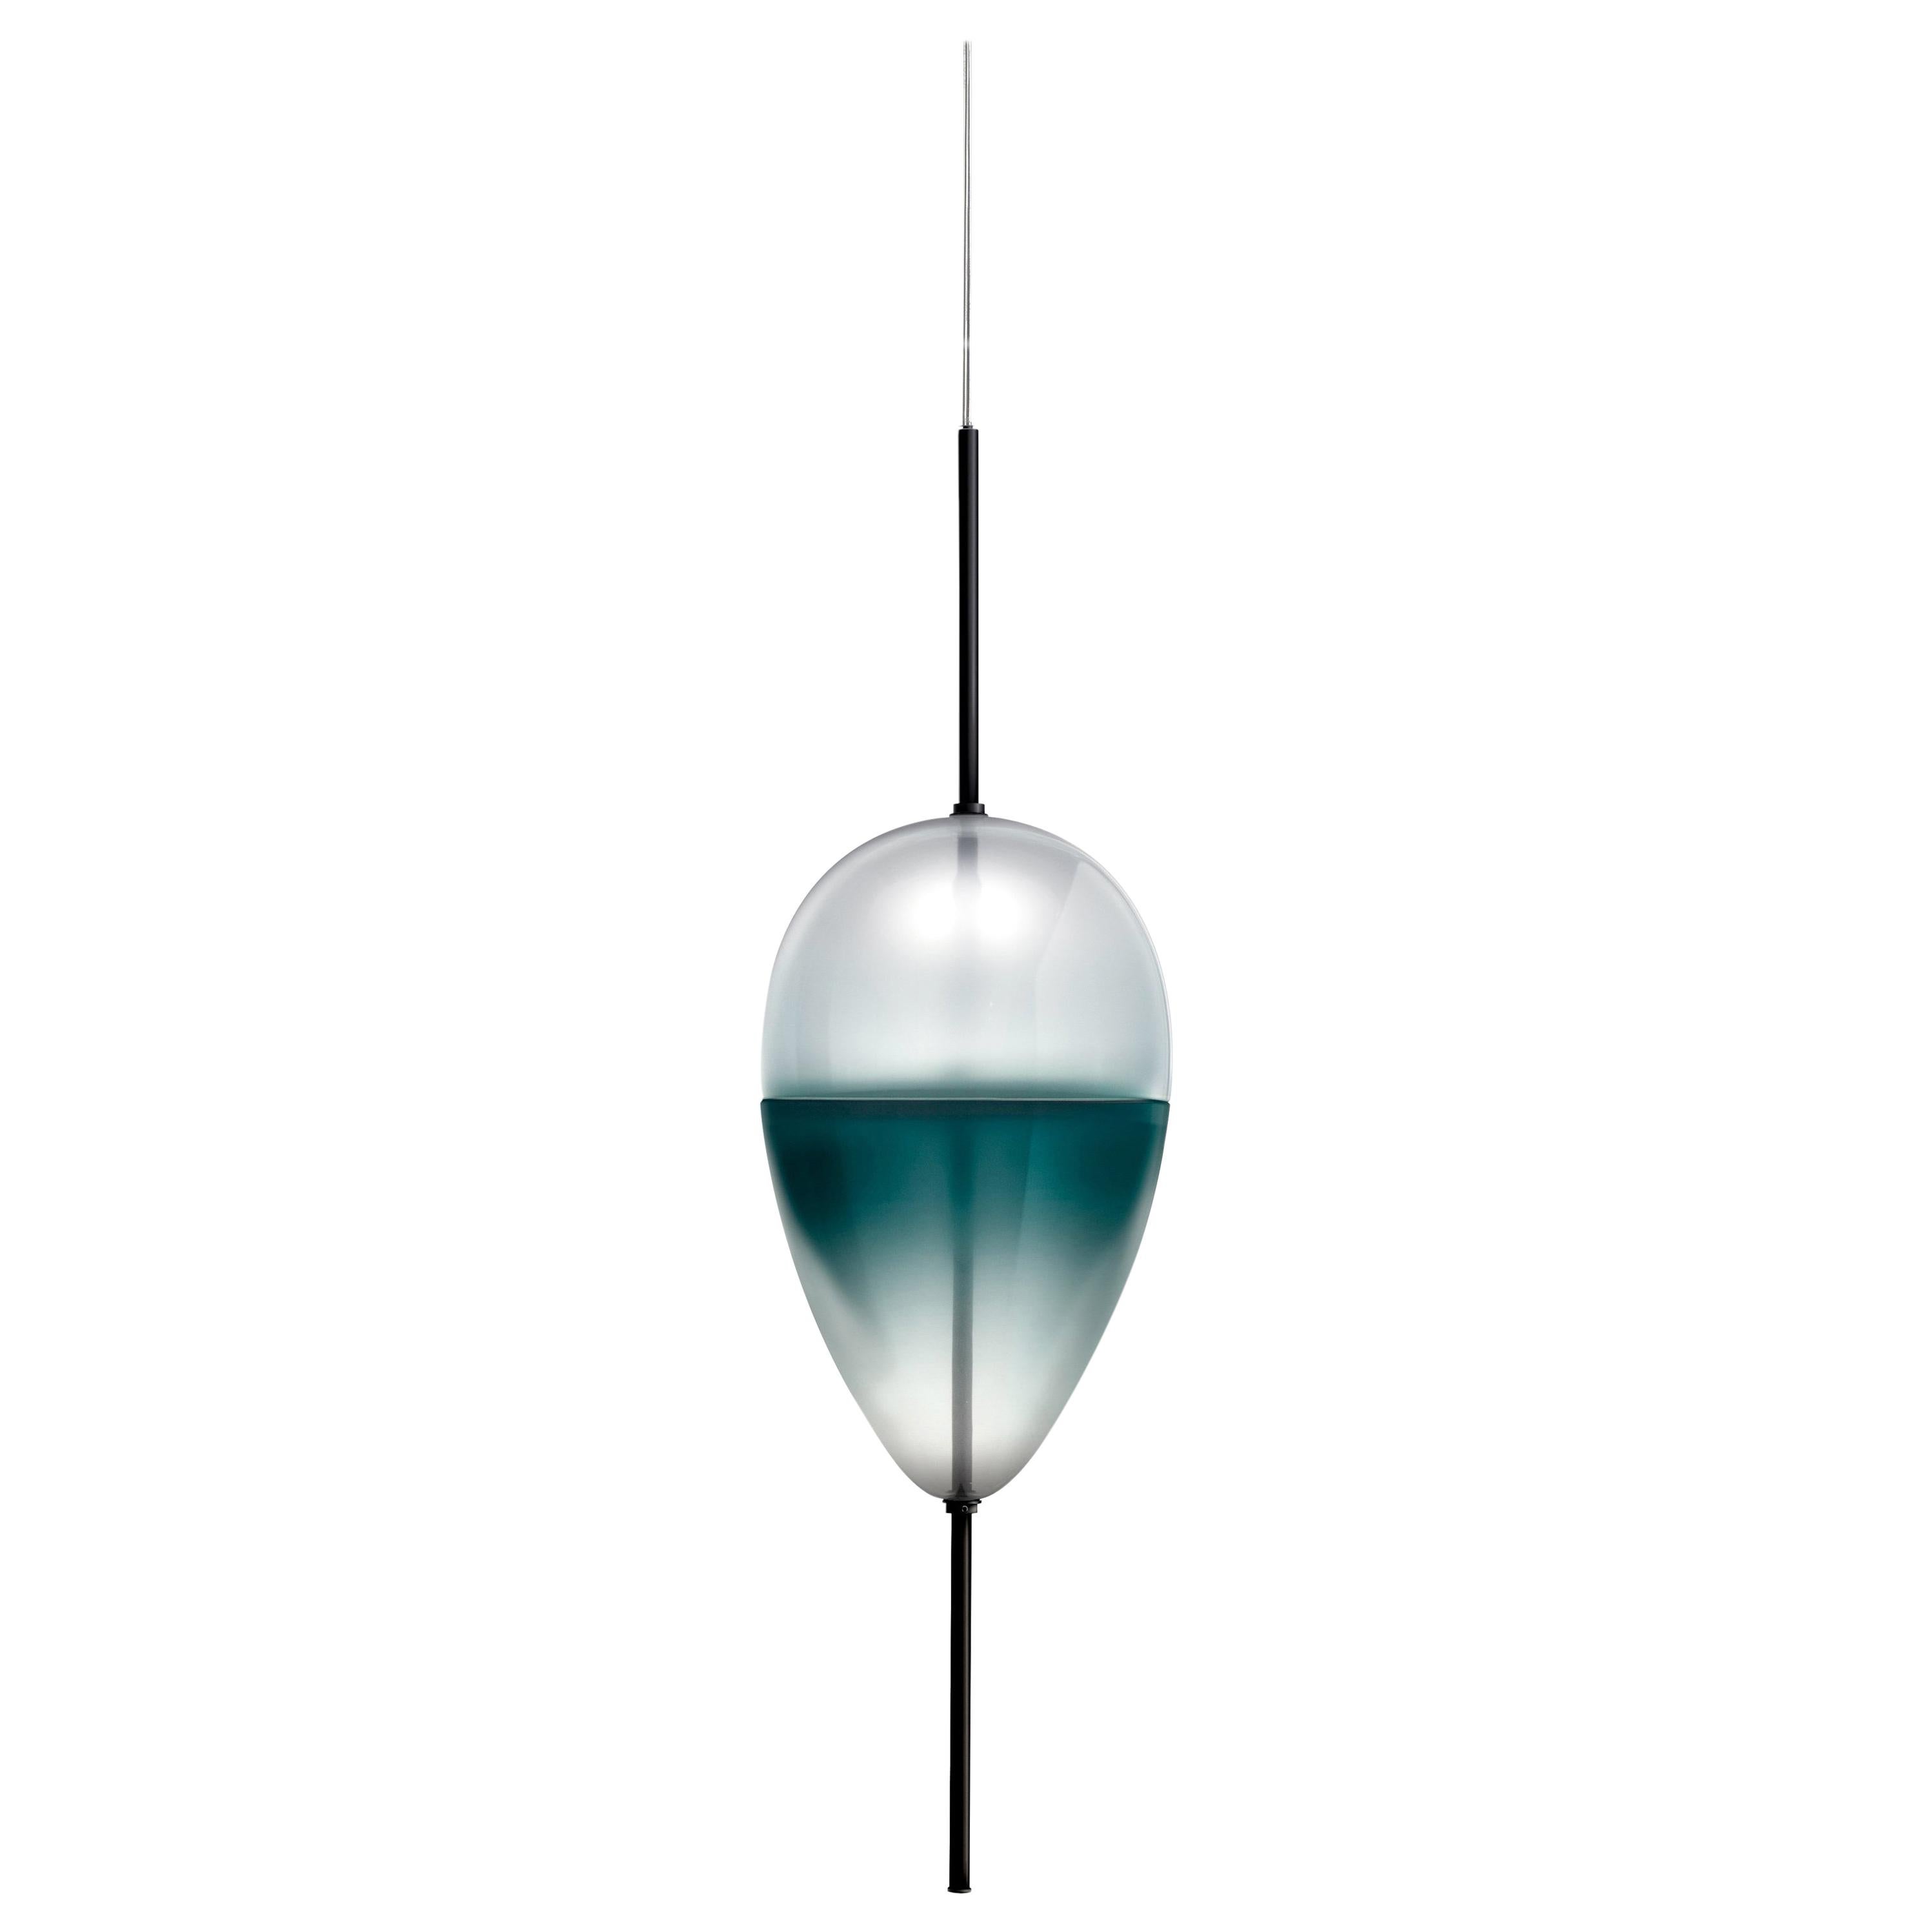 Flow[T] S7 by Nao Tamura — Murano Blown Glass Pendant Lamp For Sale